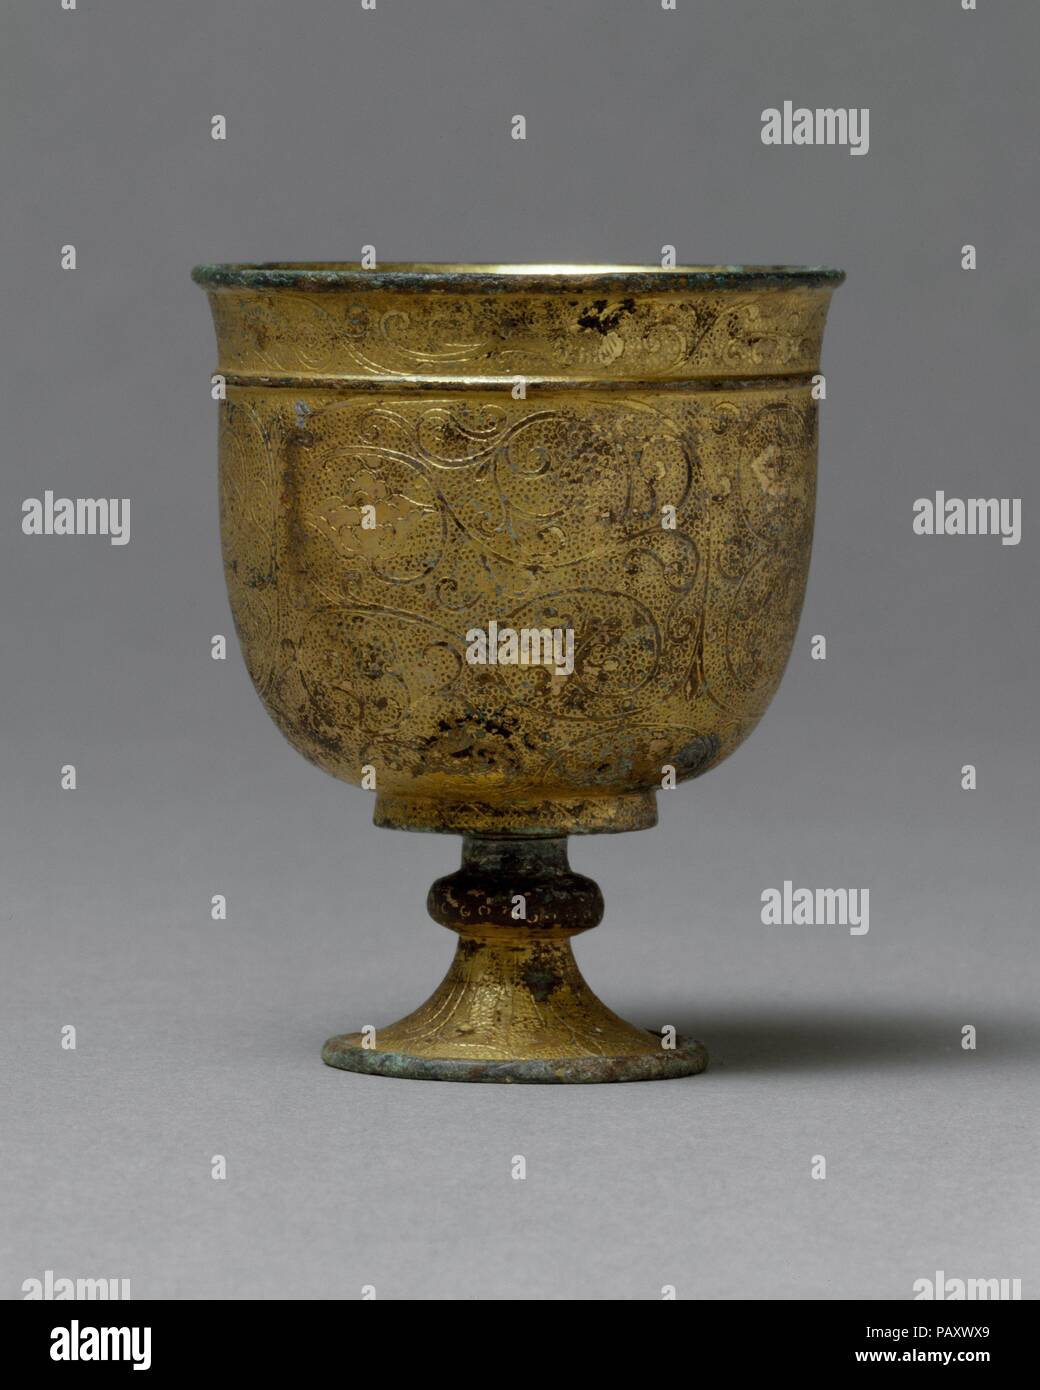 Stem Cup. Culture: China. Dimensions: H. 2 3/8 in. (6 cm). Date: late 7th-early 8th century. Museum: Metropolitan Museum of Art, New York, USA. Stock Photo